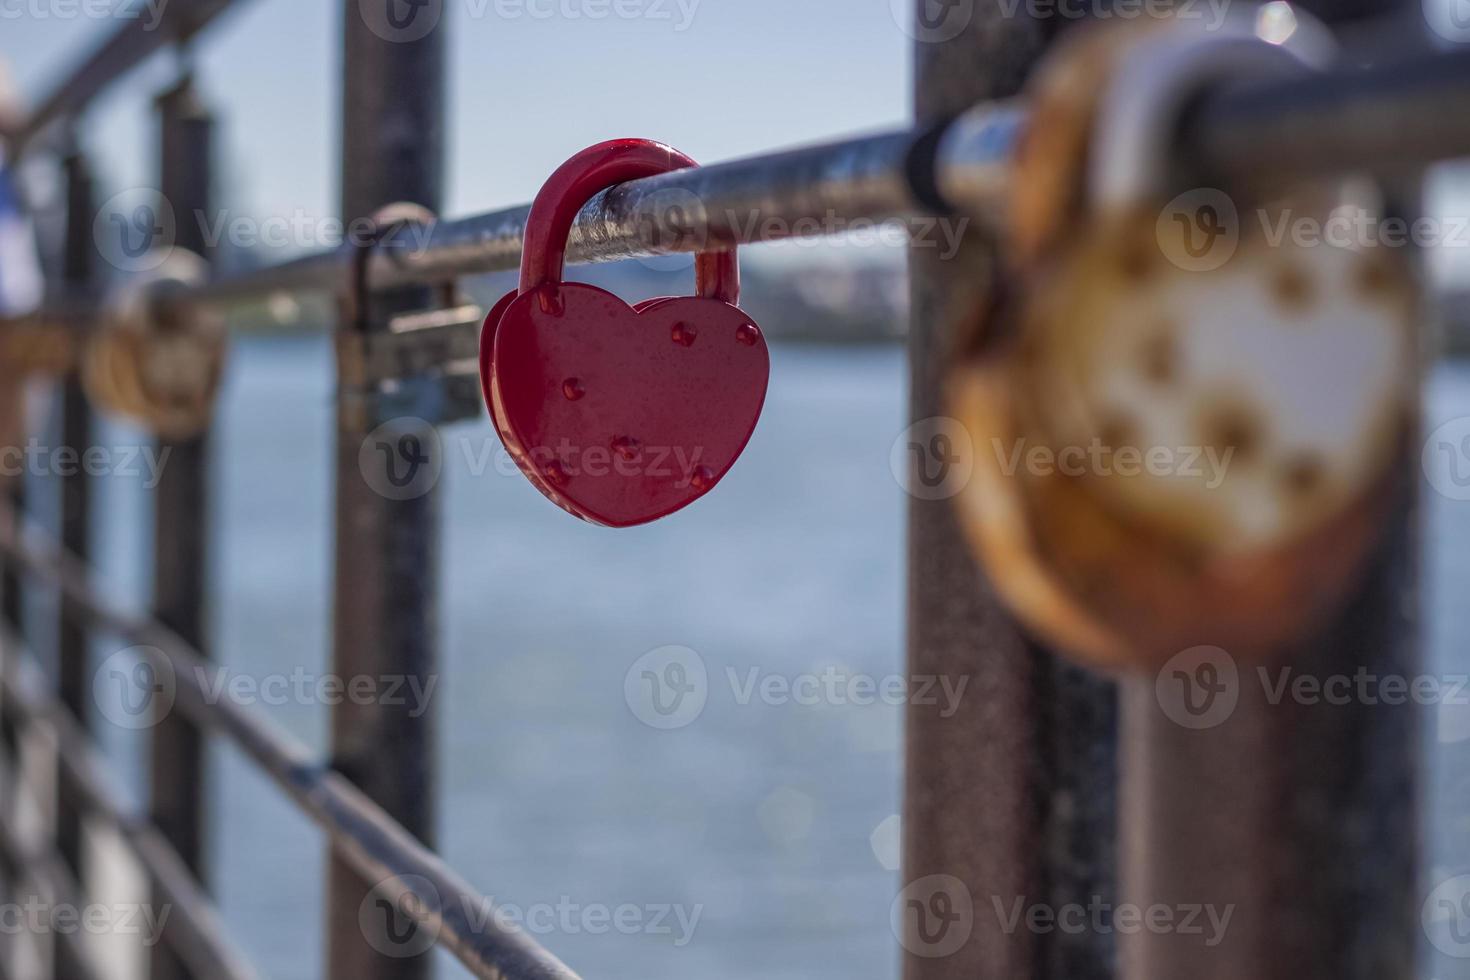 A heart-shaped door lock, a symbol of love and fidelity with a lake in the background, hangs on the fence of the bridge. The heart-shaped castle symbolizes loyalty and love photo